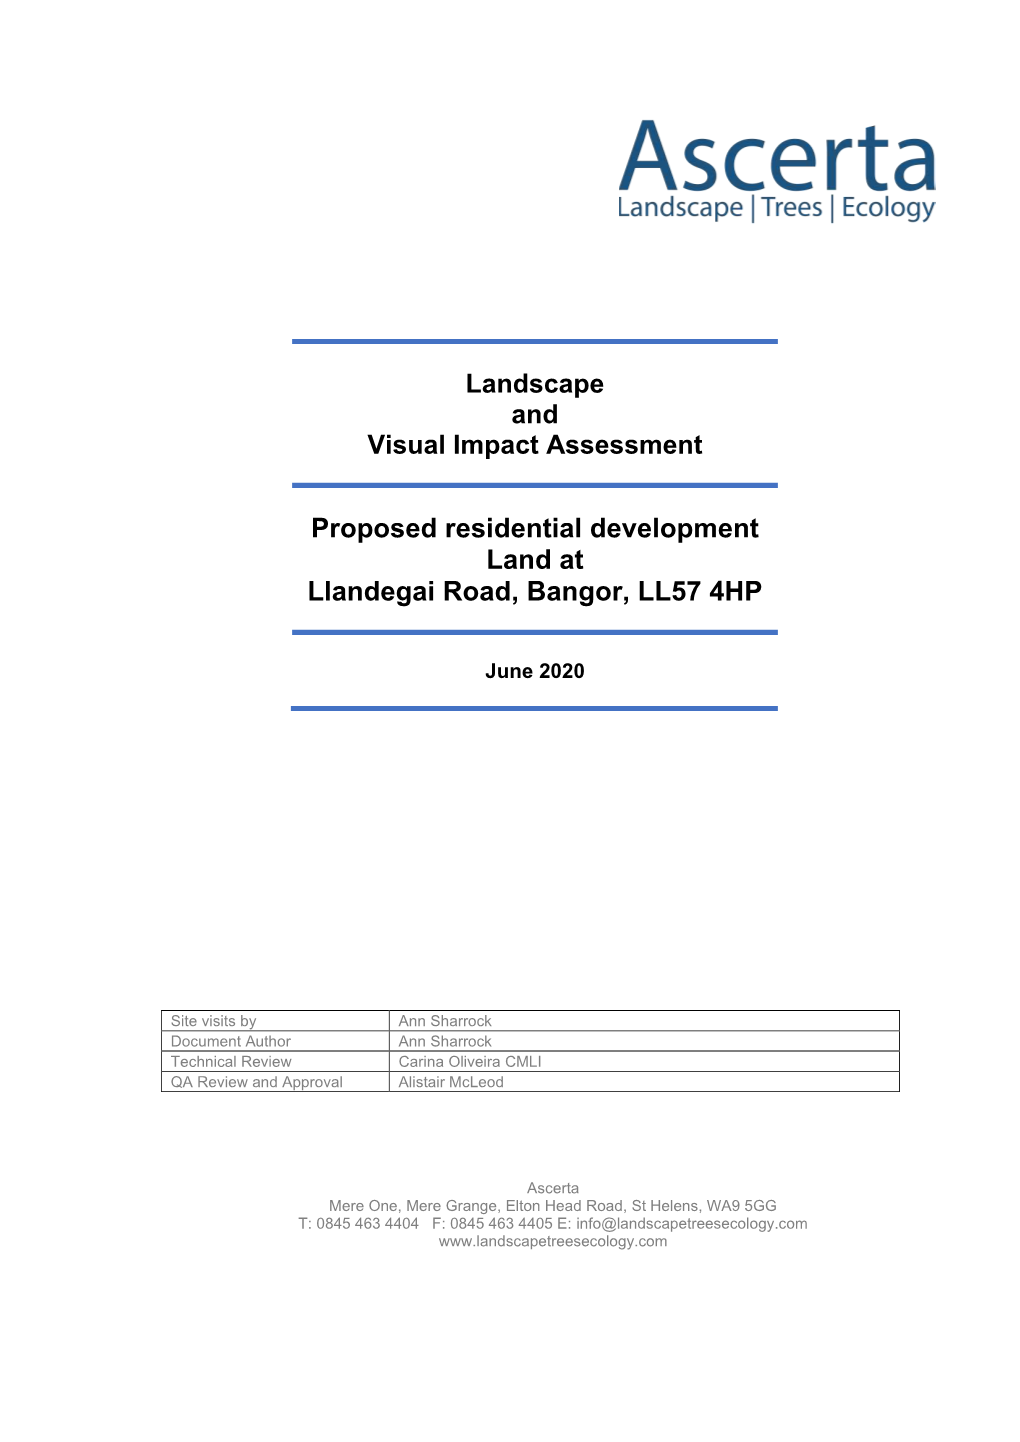 LVIA) of Proposals for a Residential Development on Land to the East of Llangedai Road, Bangor LL57 4HP